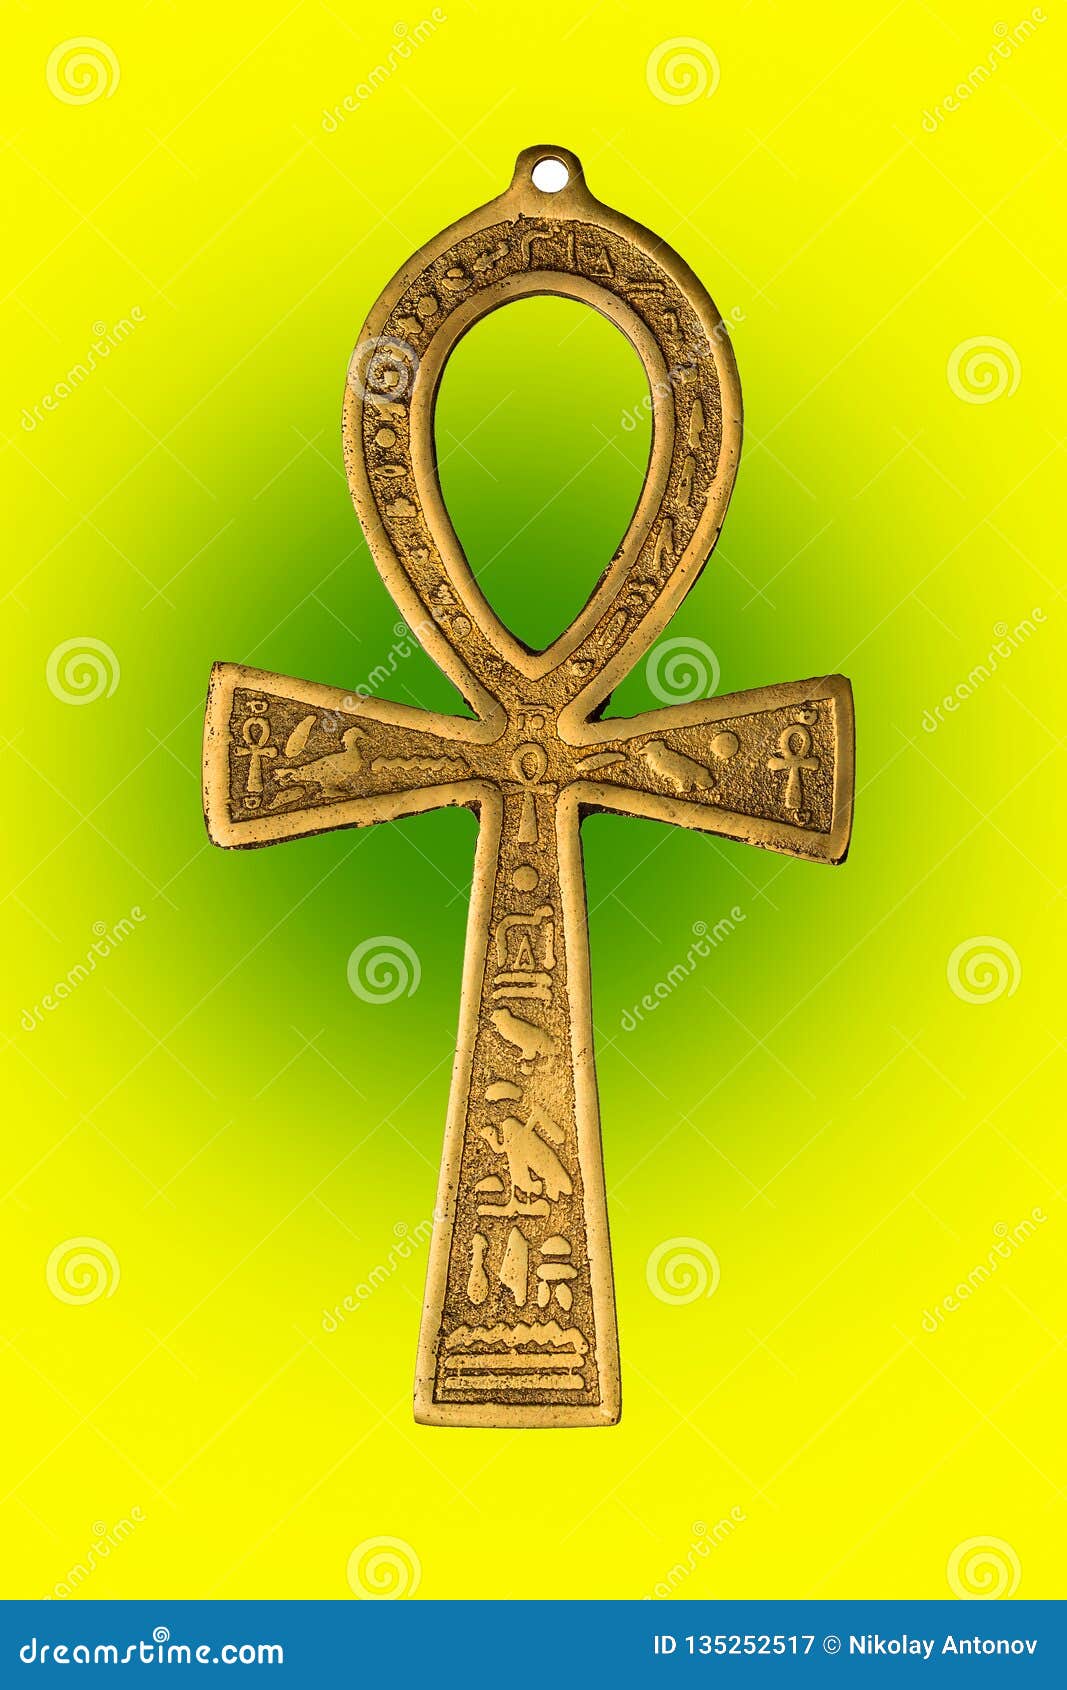 Egyptian Symbol Of Life Ankh On Yellow Green Background Close Up